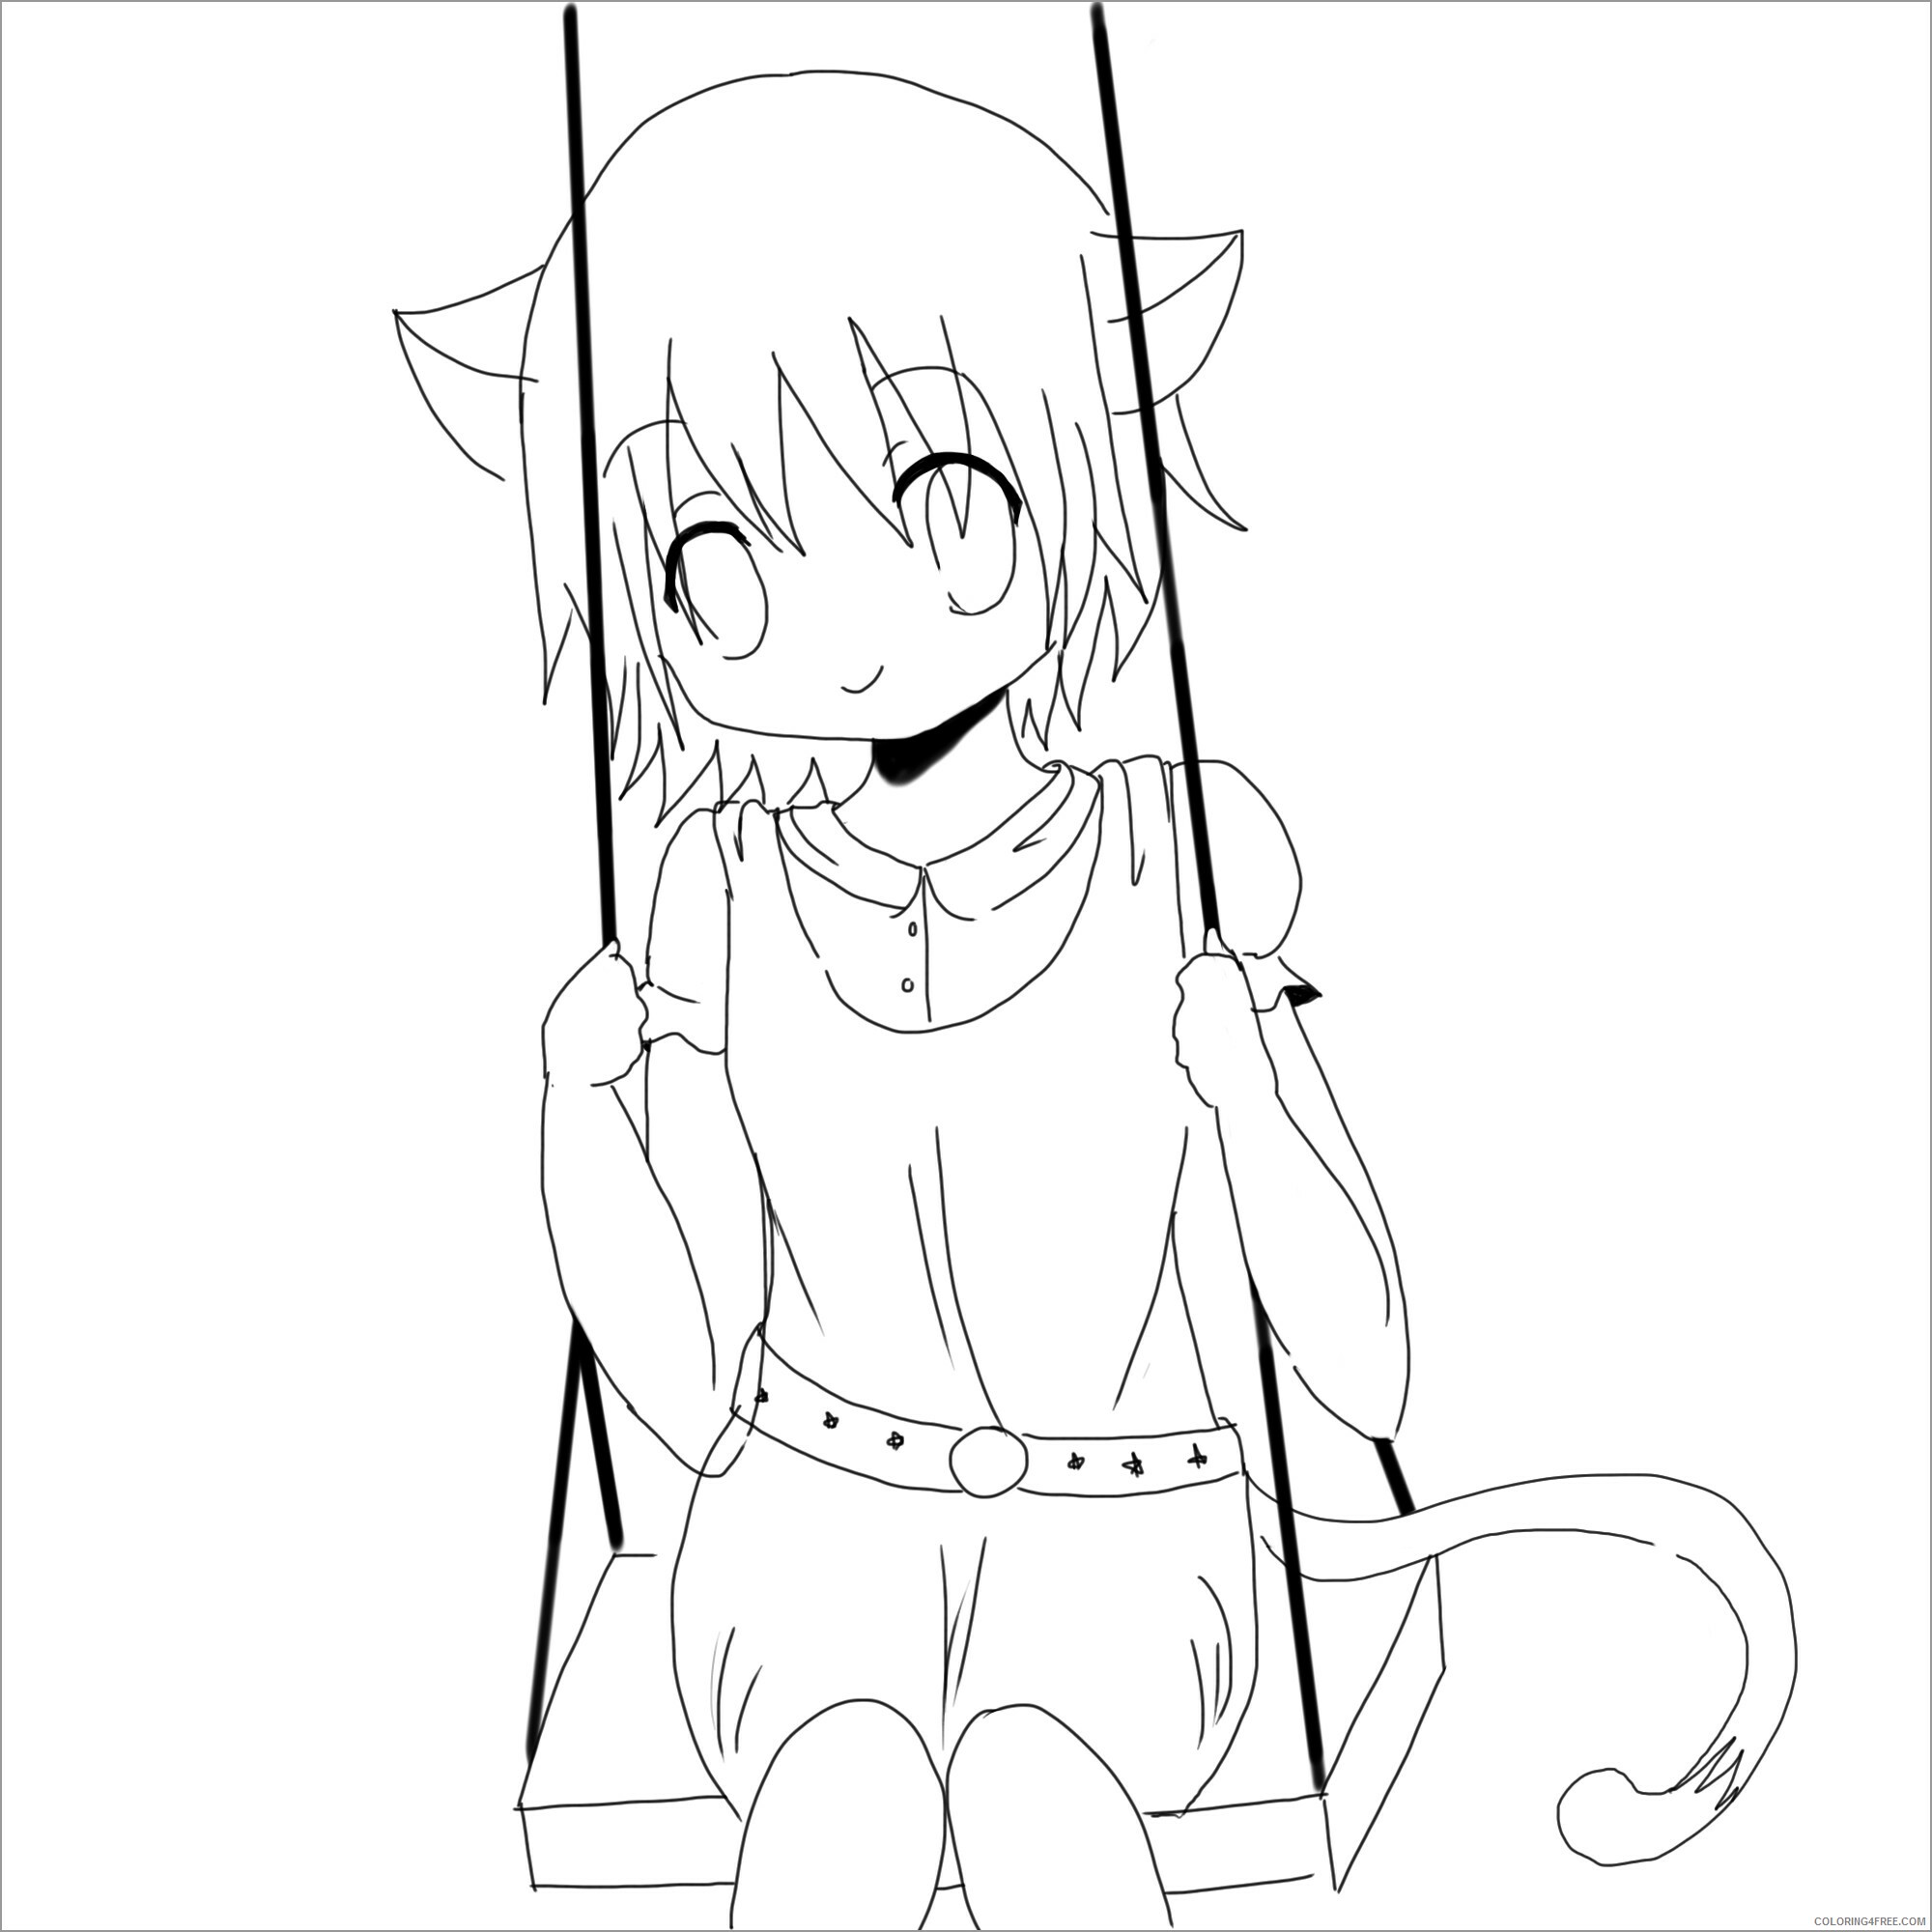 Cat Coloring Pages Animal Printable Sheets Cute Anime Cat Girl 21 0868 Coloring4free Coloring4free Com